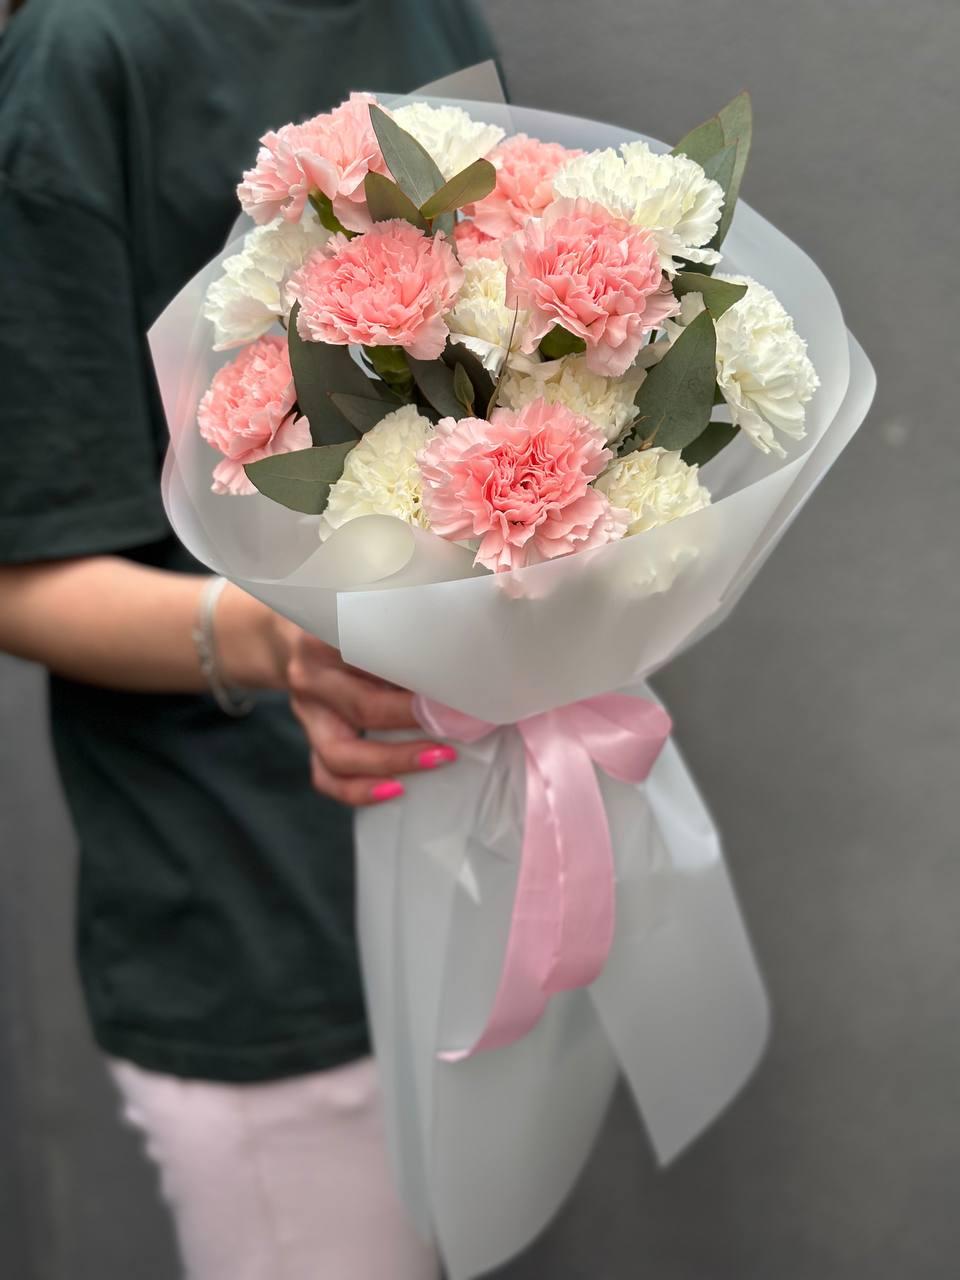 Bouquet of dianthus "Ricky"